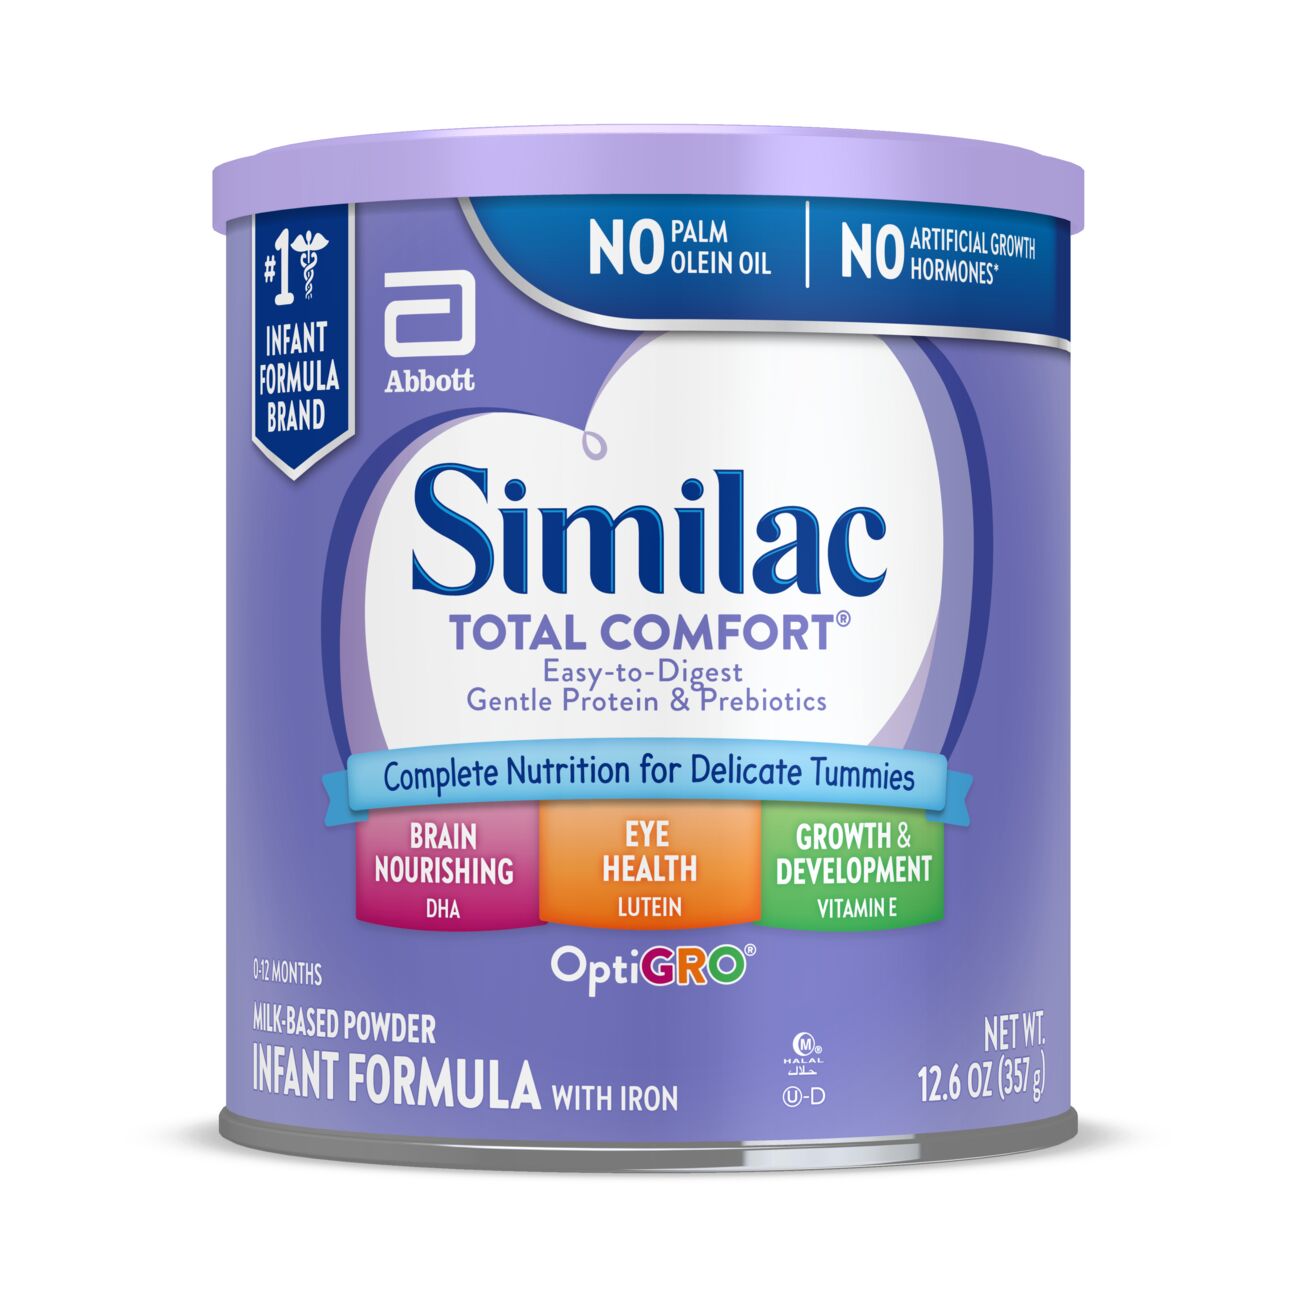 Canadian Infant Formula Shortage – Mitigation and Recommendations